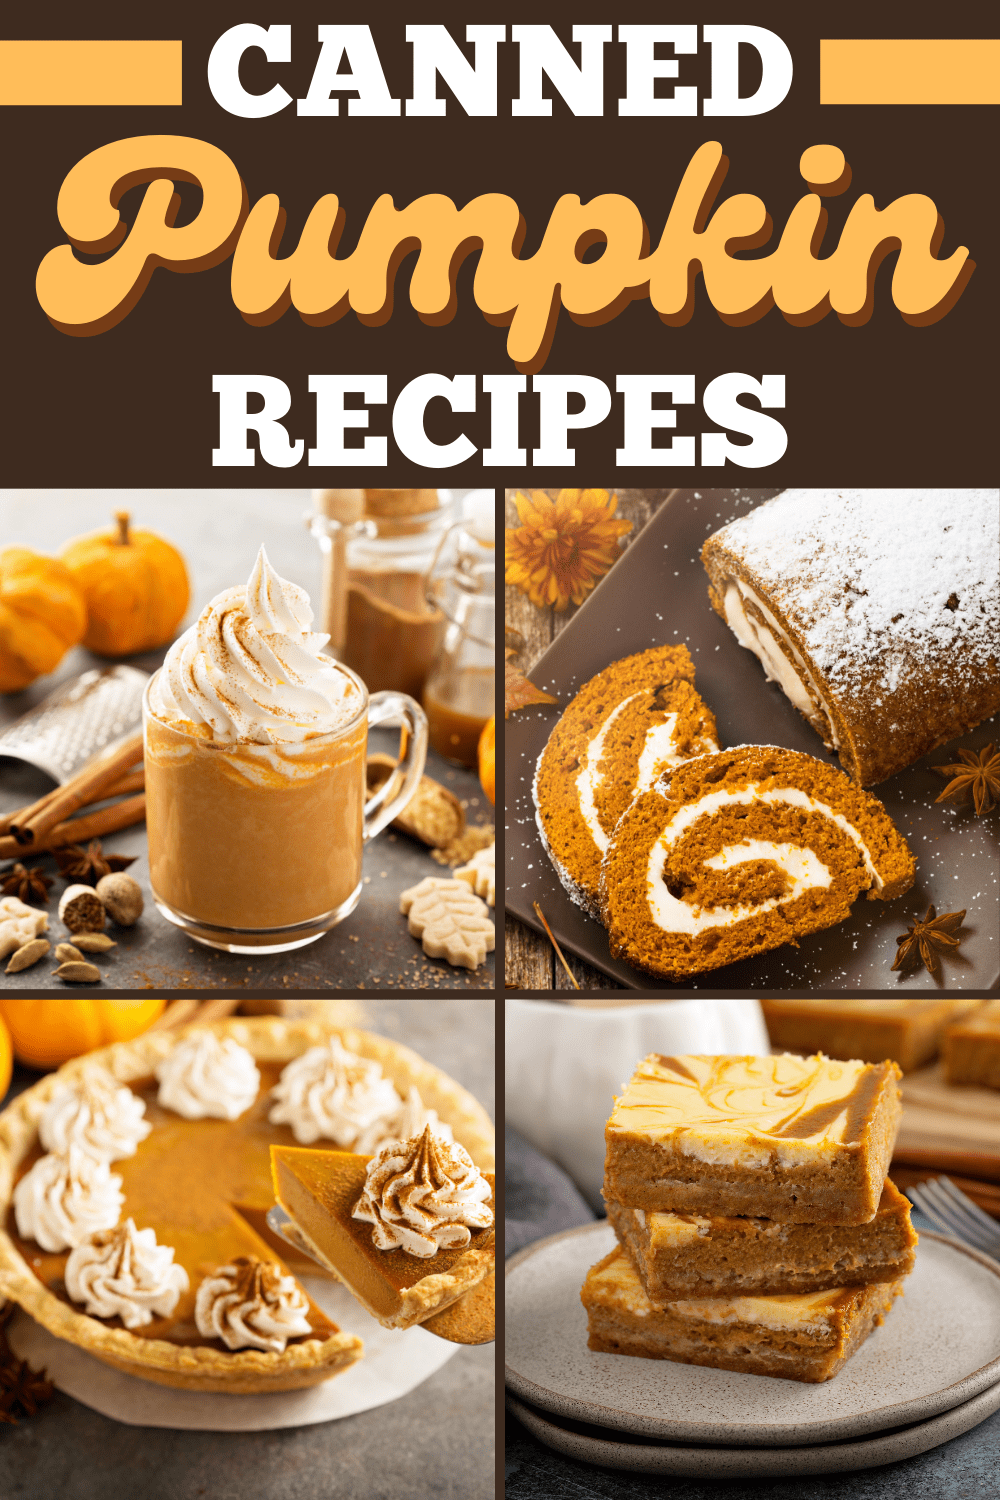 31 Easy Canned Pumpkin Recipes - Insanely Good